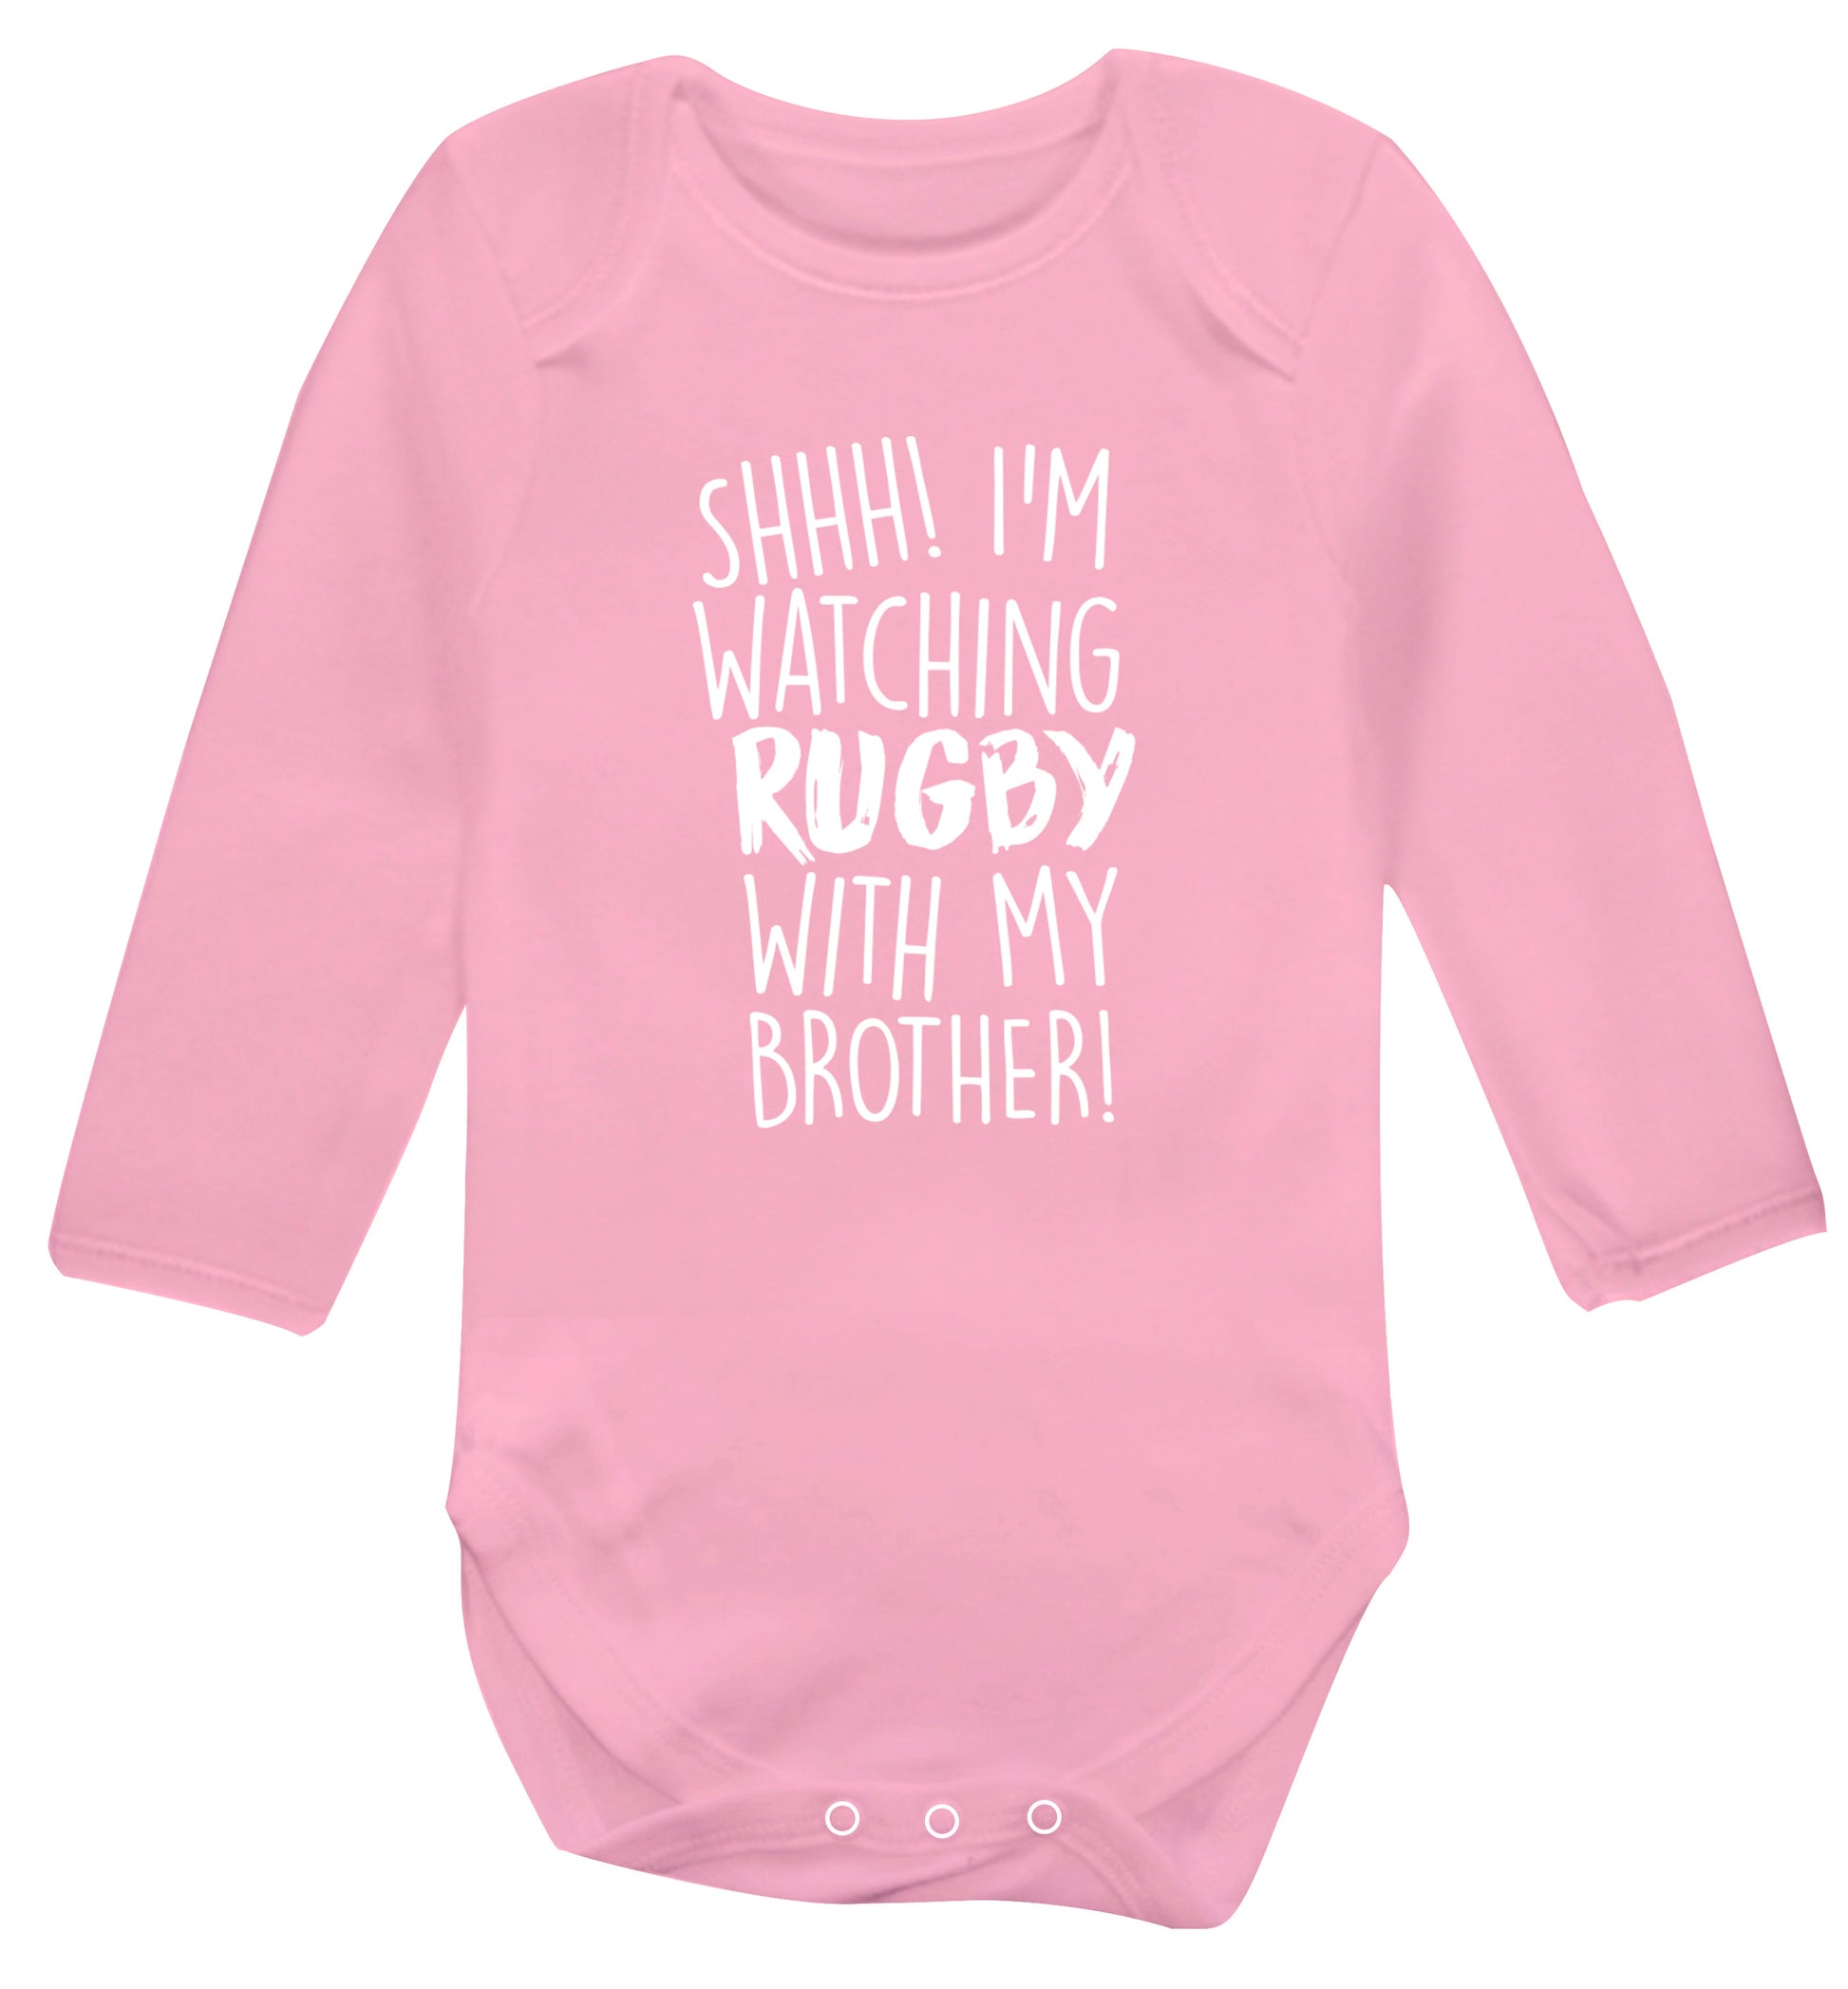 Shh... I'm watching rugby with my brother Baby Vest long sleeved pale pink 6-12 months